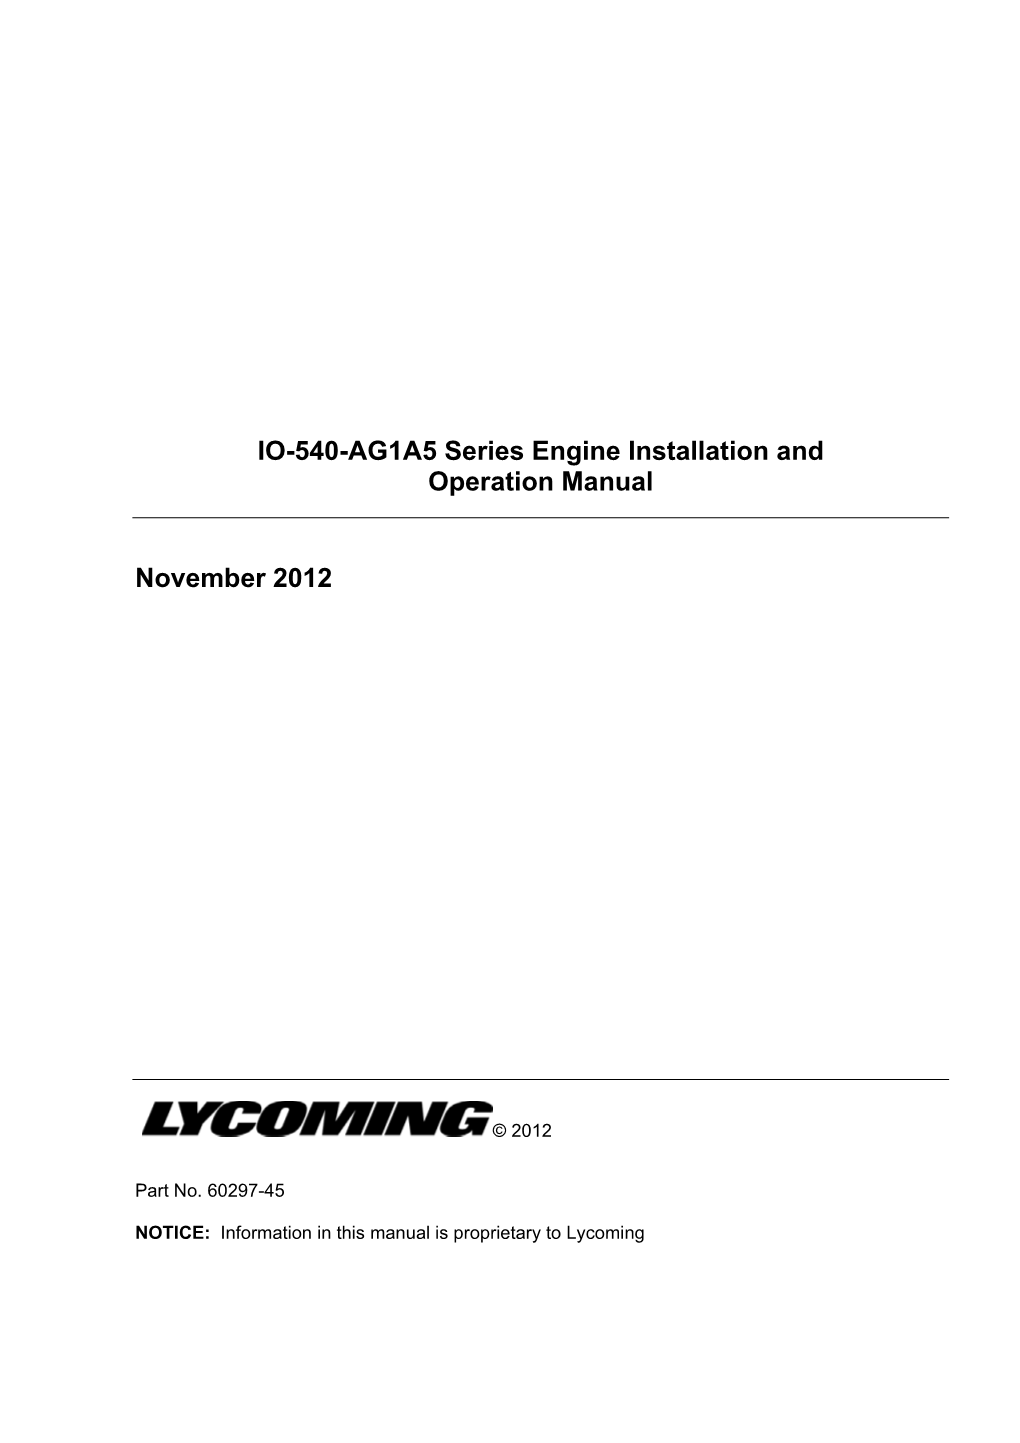 IO-540-AG1A5 Series Engine Installation and Operation Manual